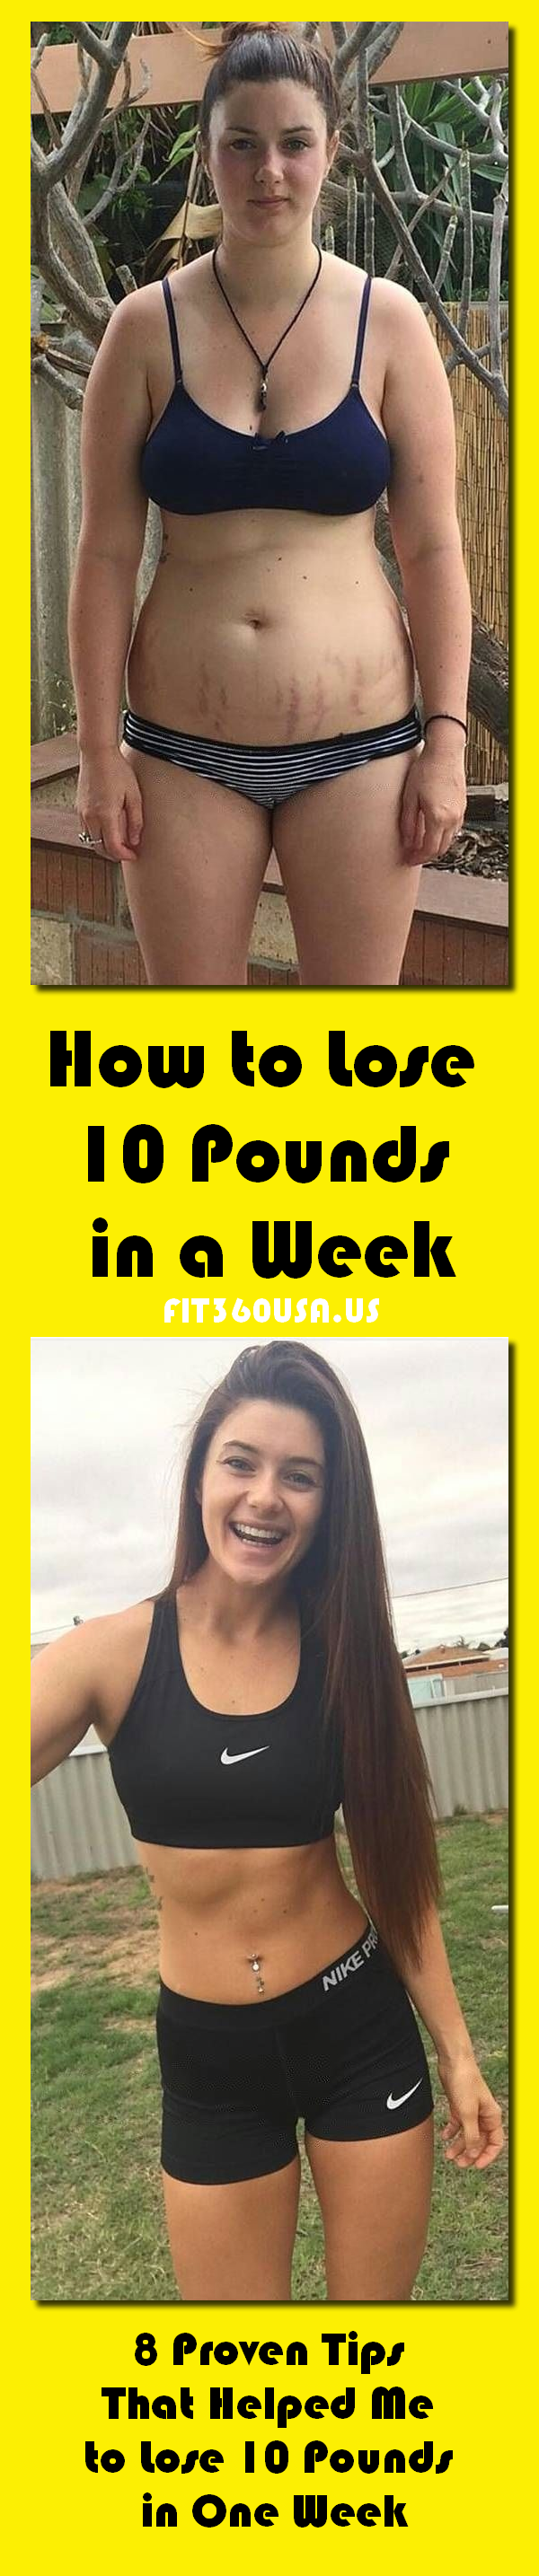 How to Lose 10 Pounds in a Week – 8 Proven Tips That Helped Me to Lose 10 Pounds in 1 Week